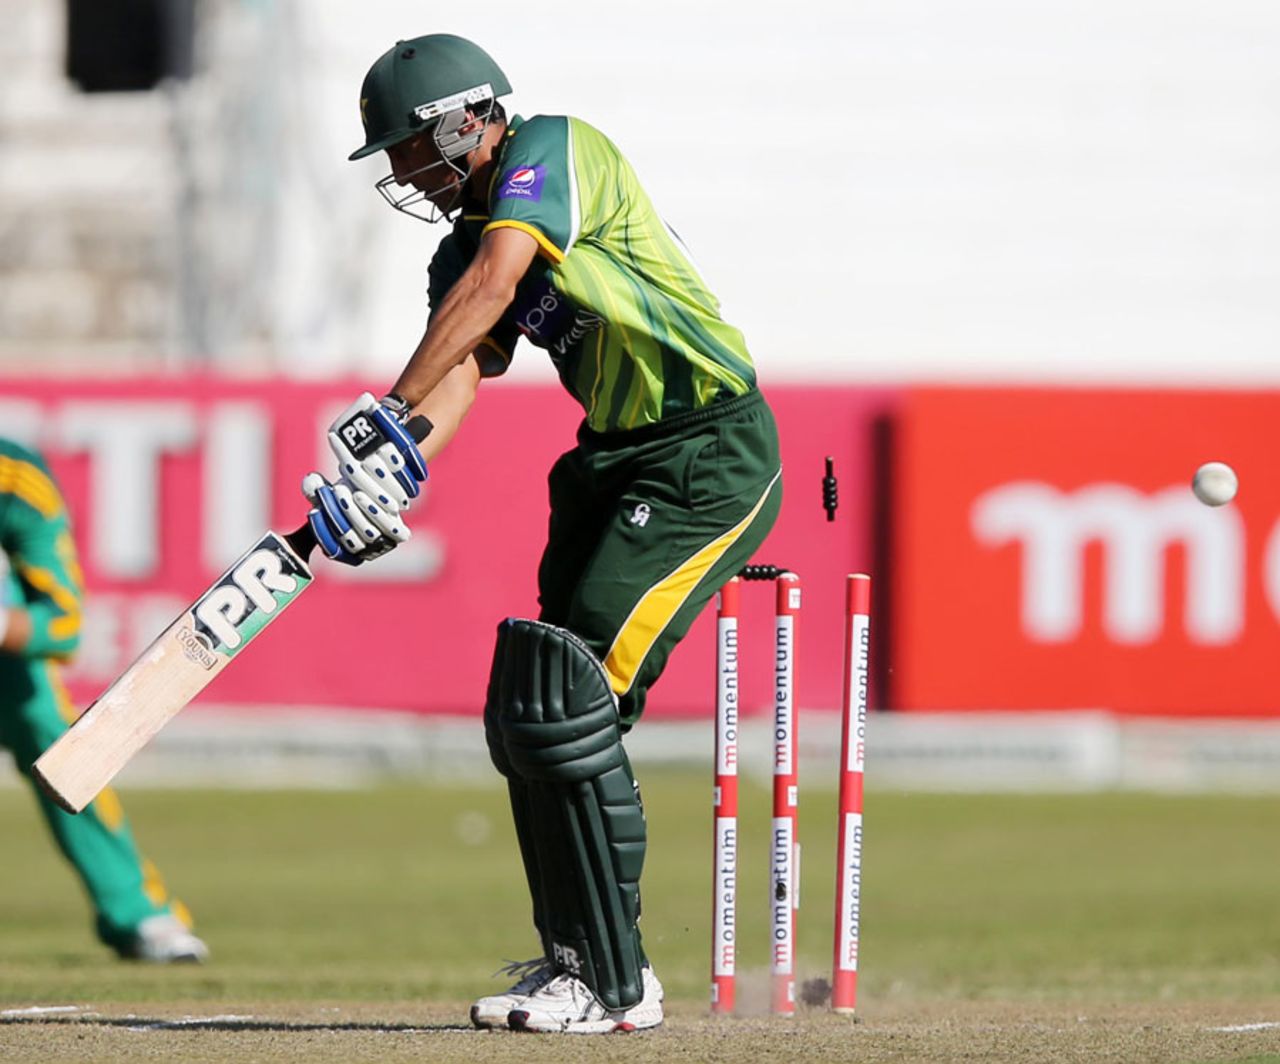 Younis Khan is bowled by Rory Kleinveldt, South Africa v Pakistan, 4th ODI, Durban, March 21, 2013